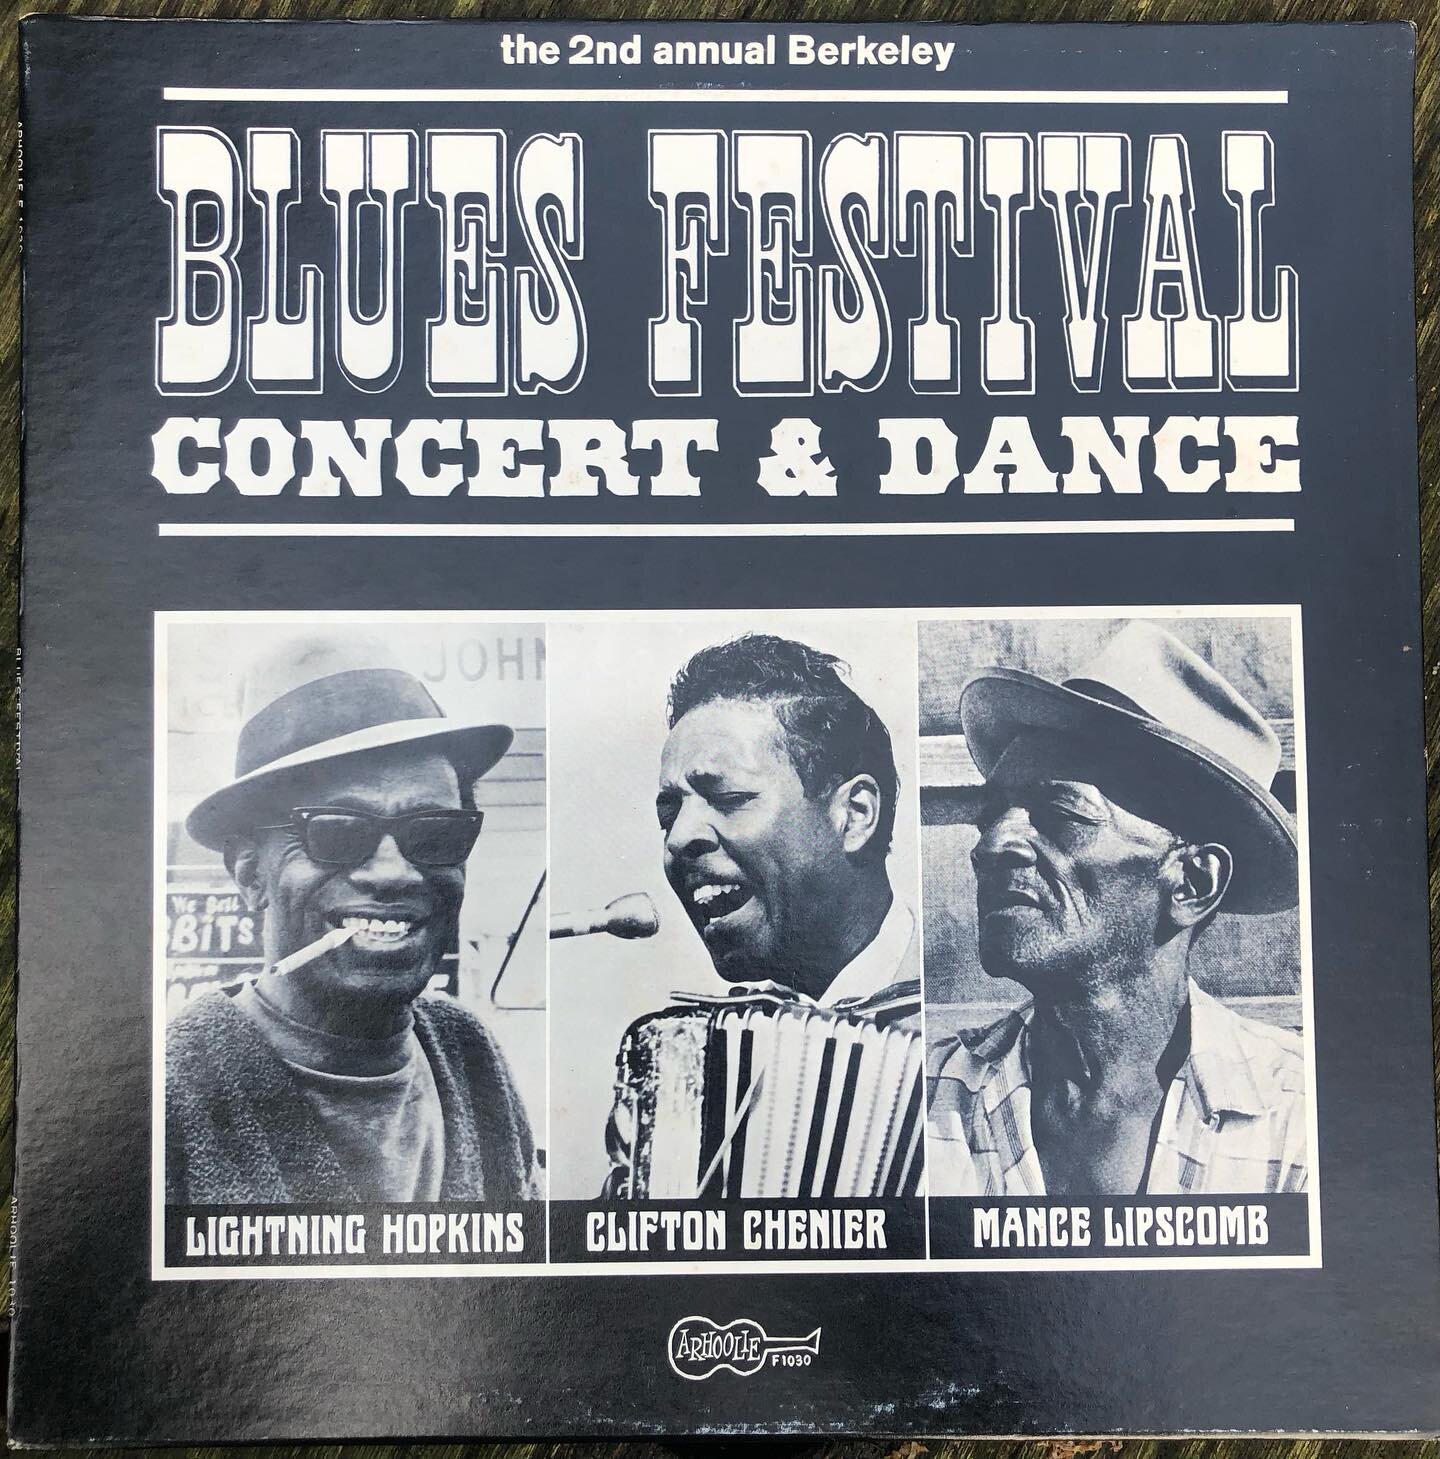 NEW BLOG POST: The 2nd Annual Berkeley Blues Festival Concert &amp; Dance (1966) - third in a series of records I can&rsquo;t believe nobody has bought from me yet. Read all about it via bluesnight.org (link in bio).